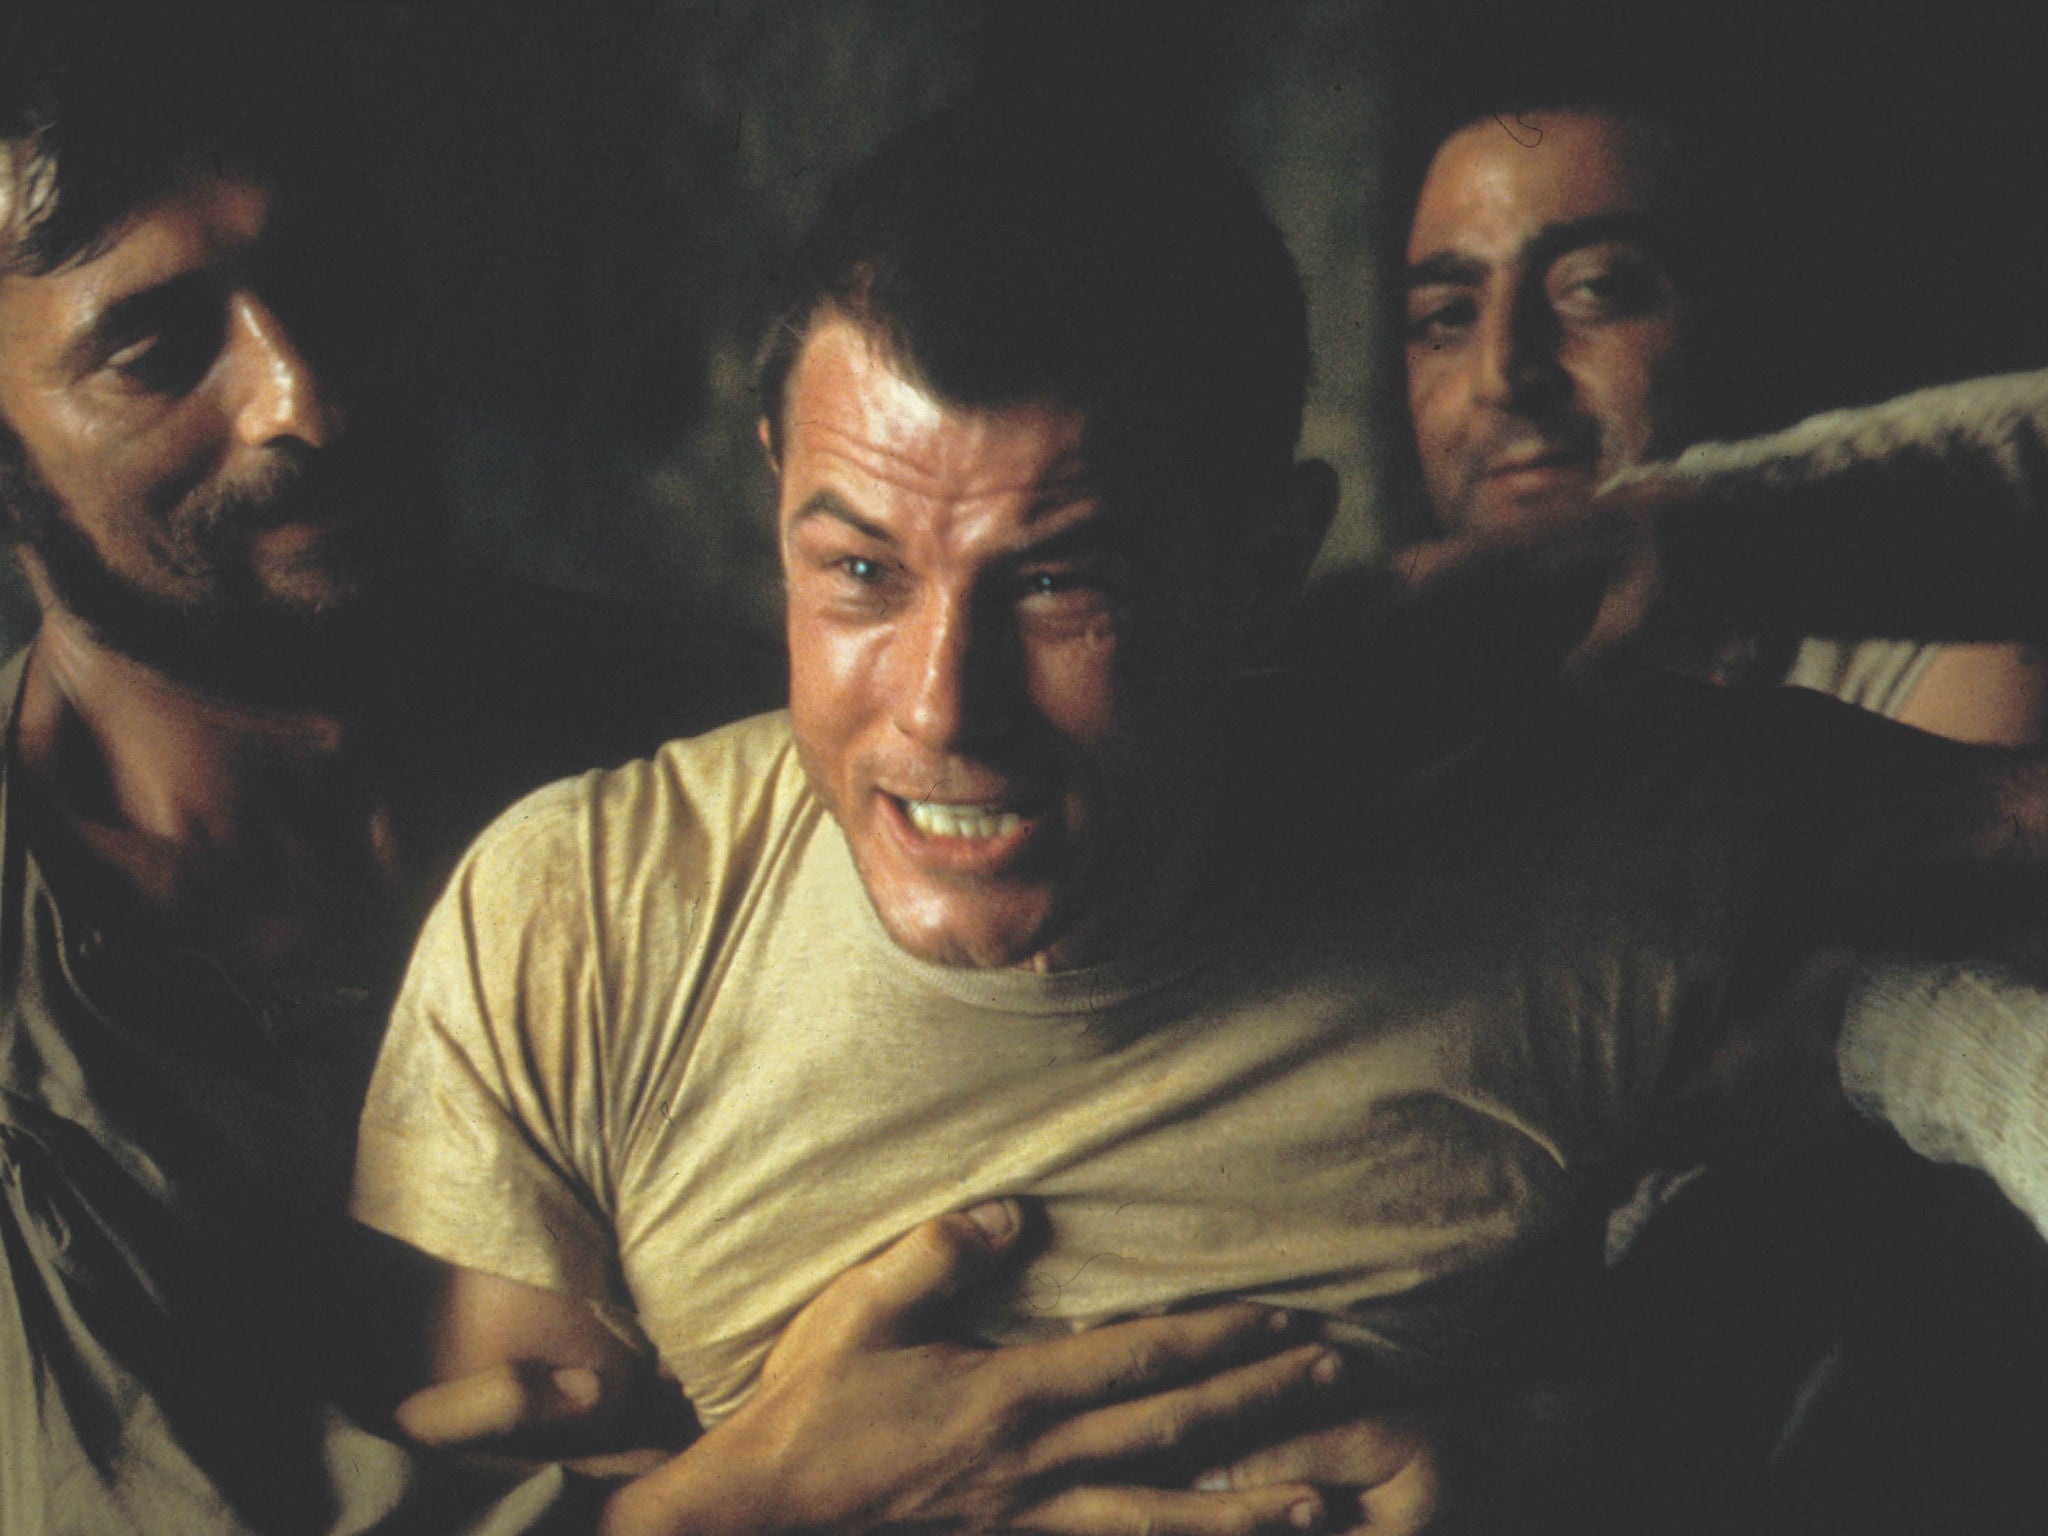 Midnight Express The Cult Film That Had Disastrous Consequences For